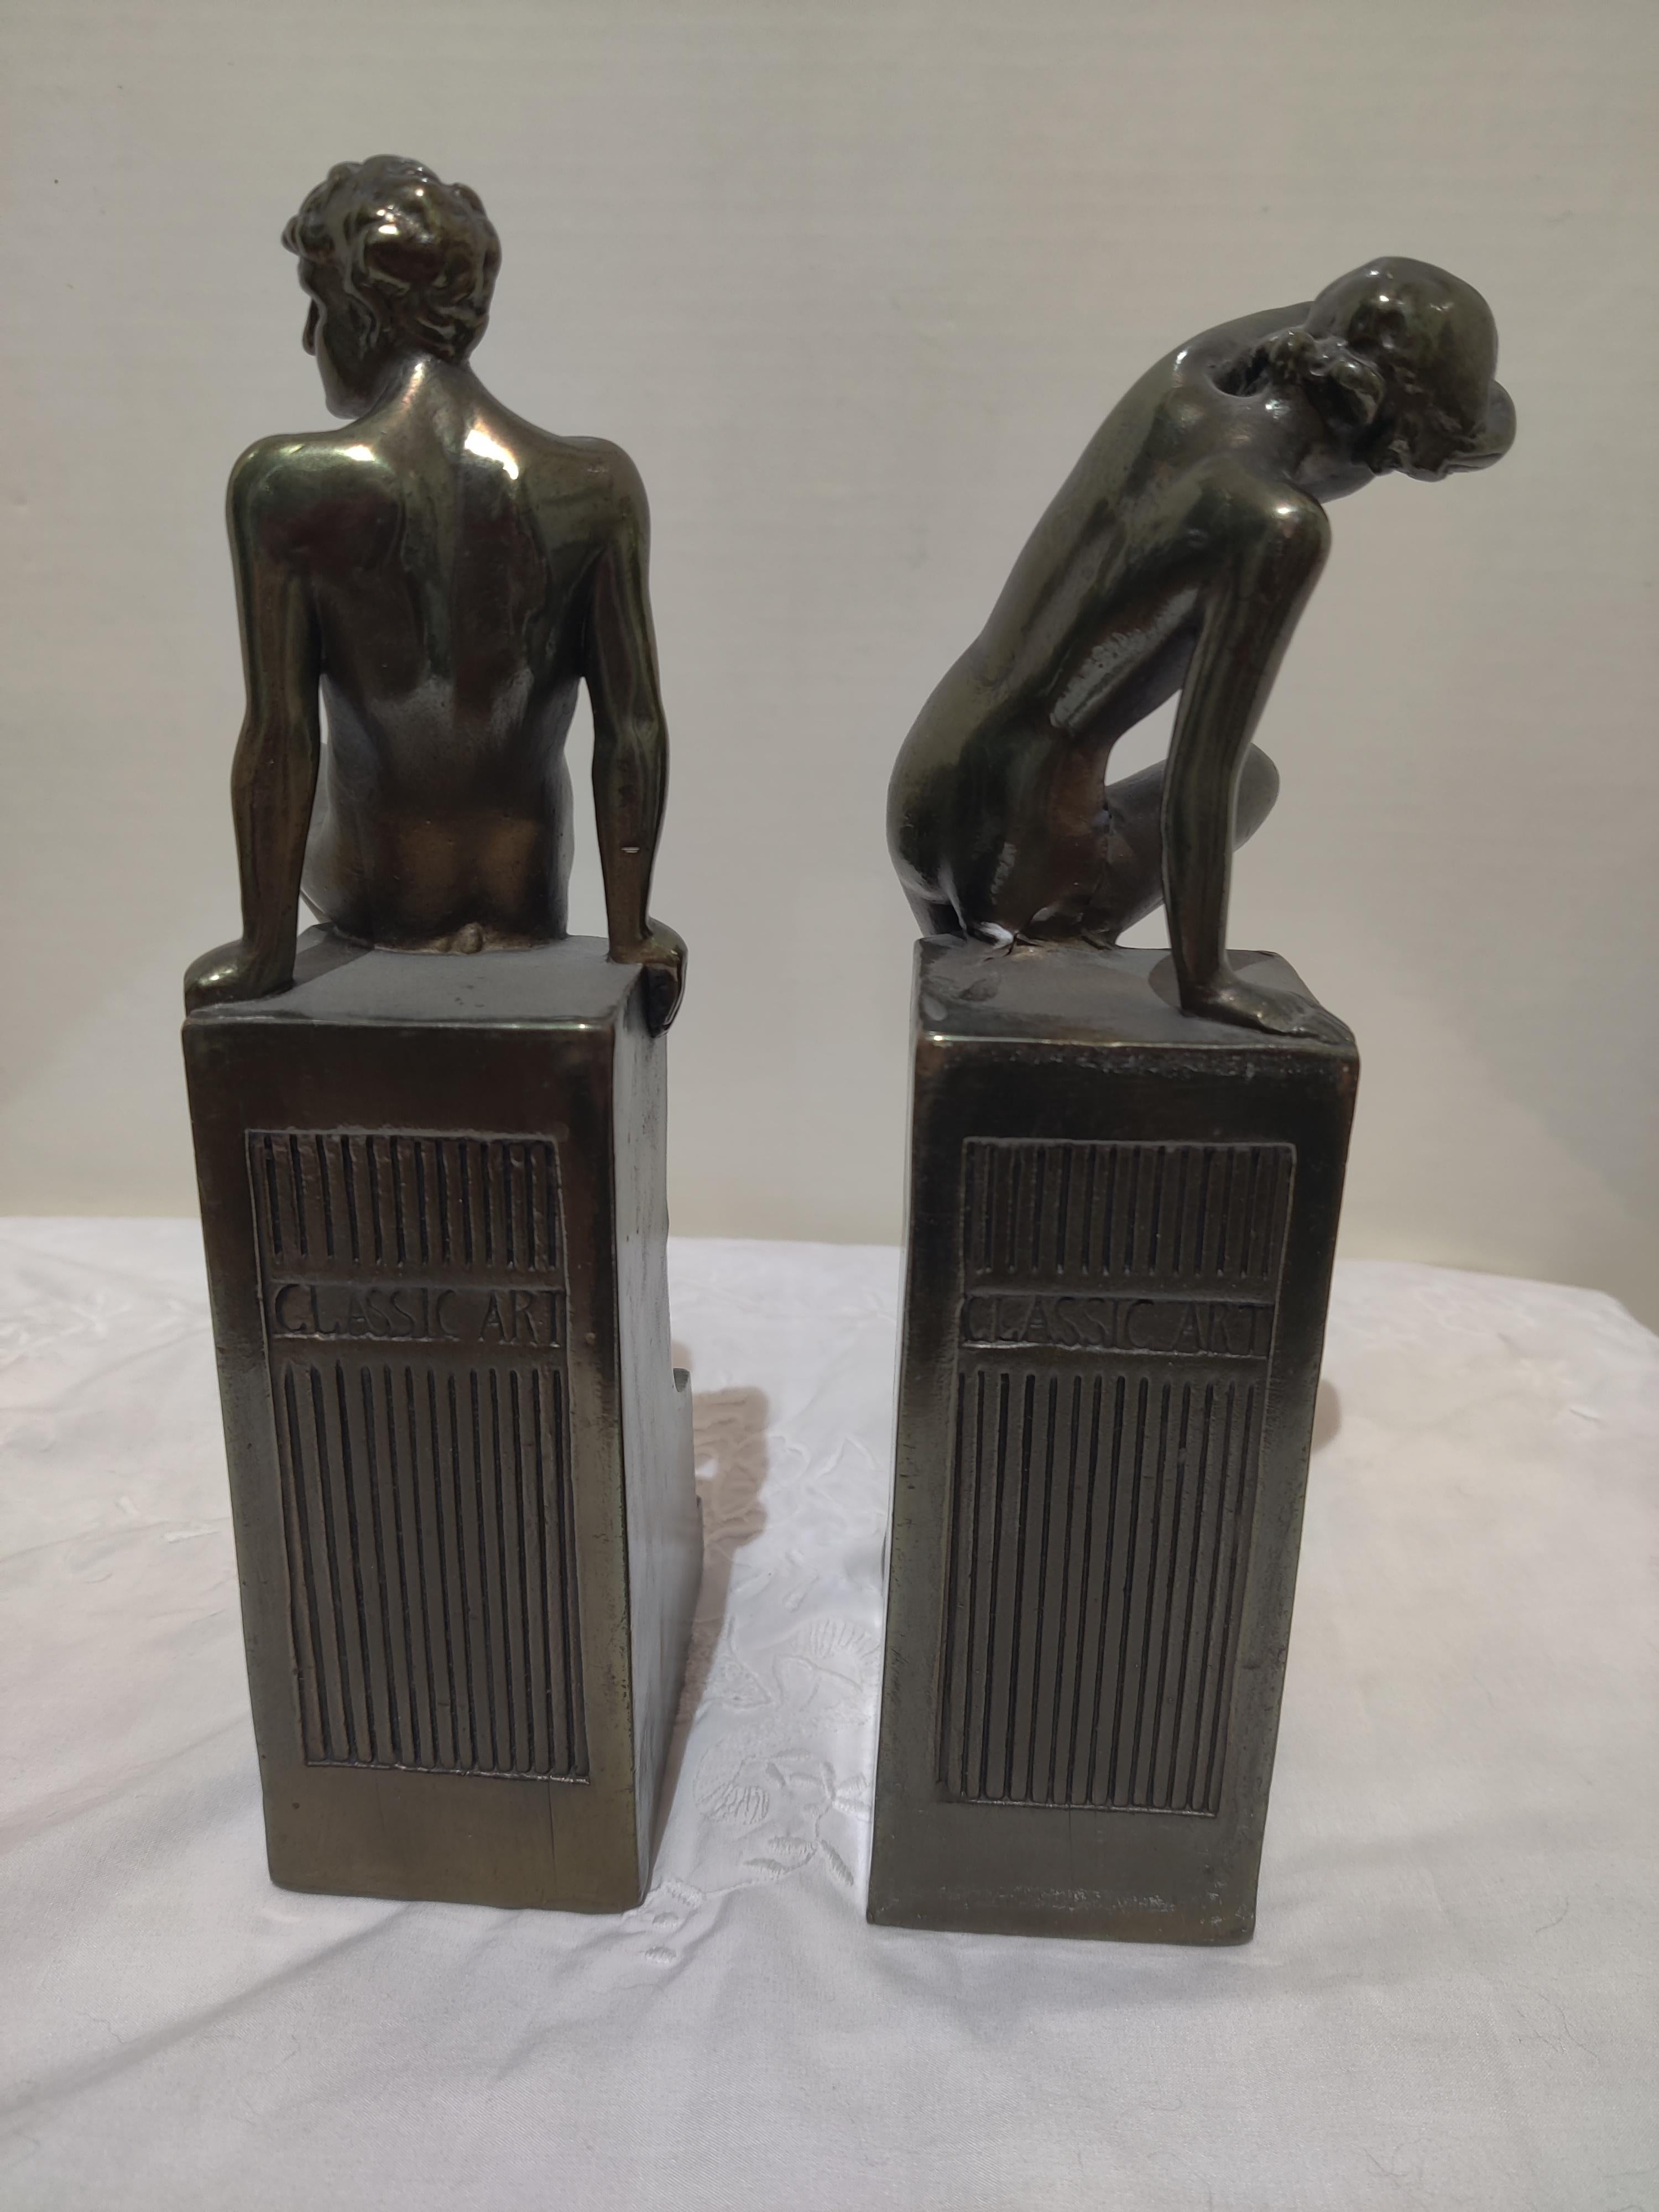 Classic Art Nude Bronze Bookends For Sale 2